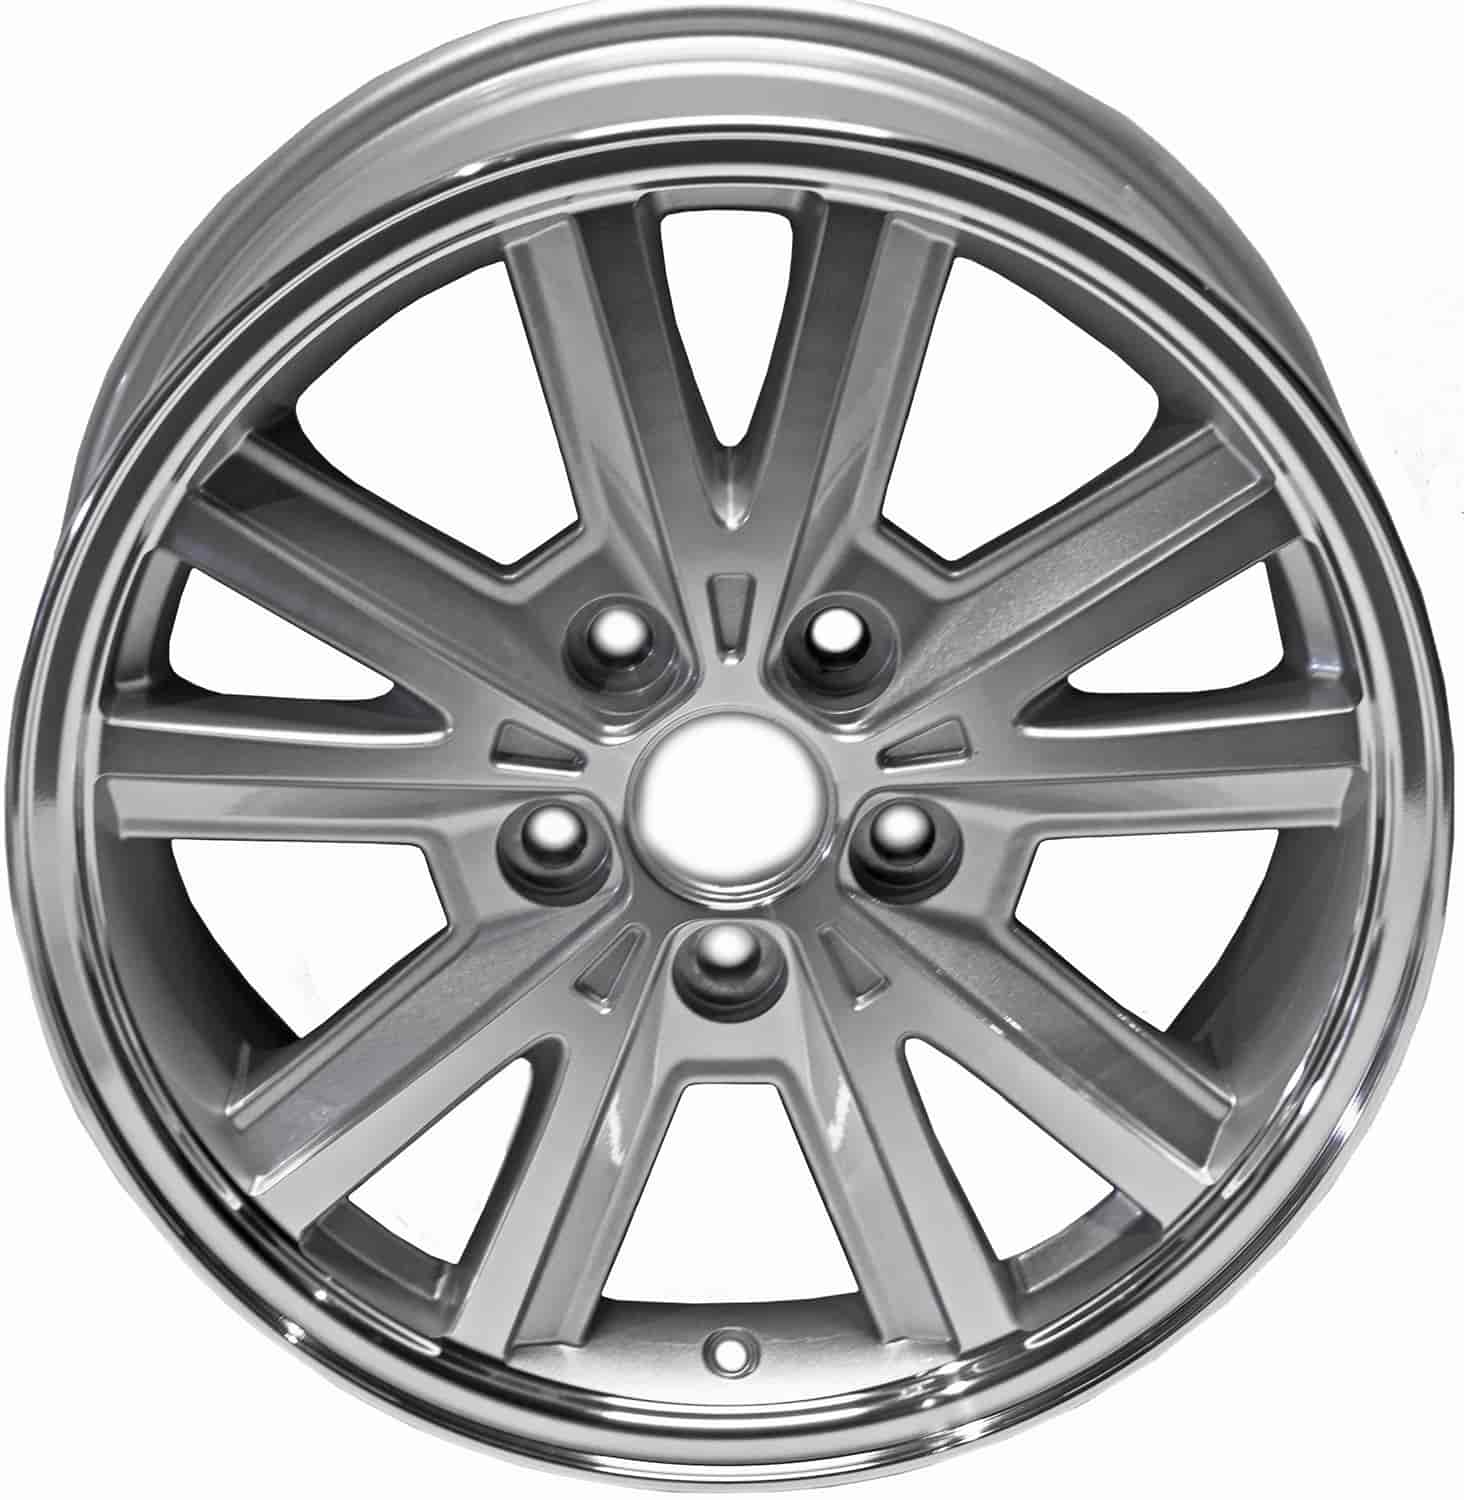 16 X 7 IN. MACHINED ALLOY